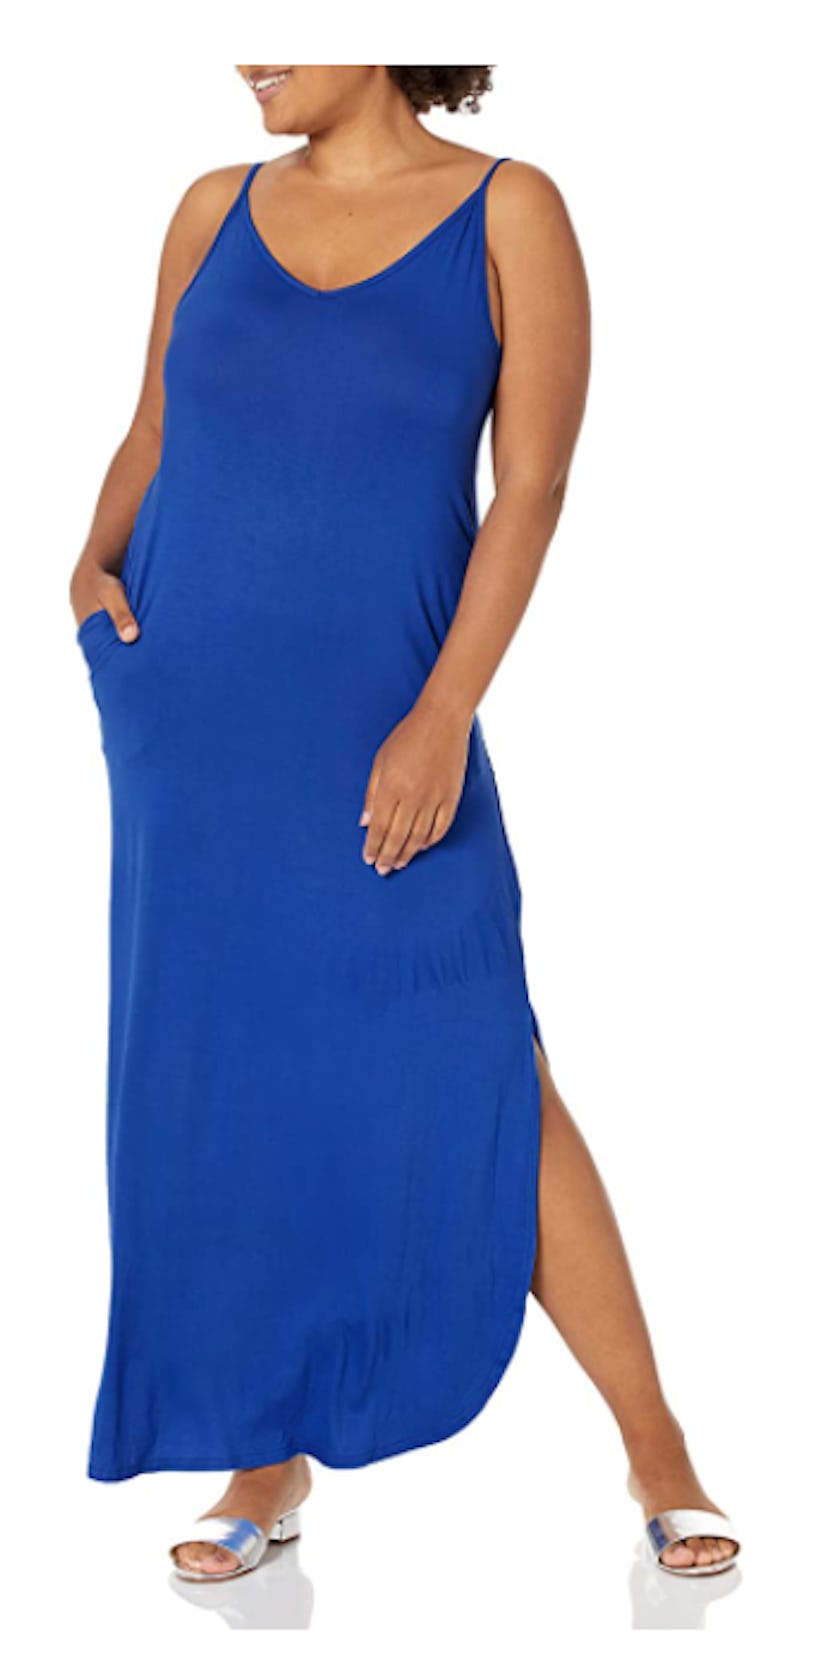 This loose-fit backless maxi dress boasts everyone's favorite feature: pockets.